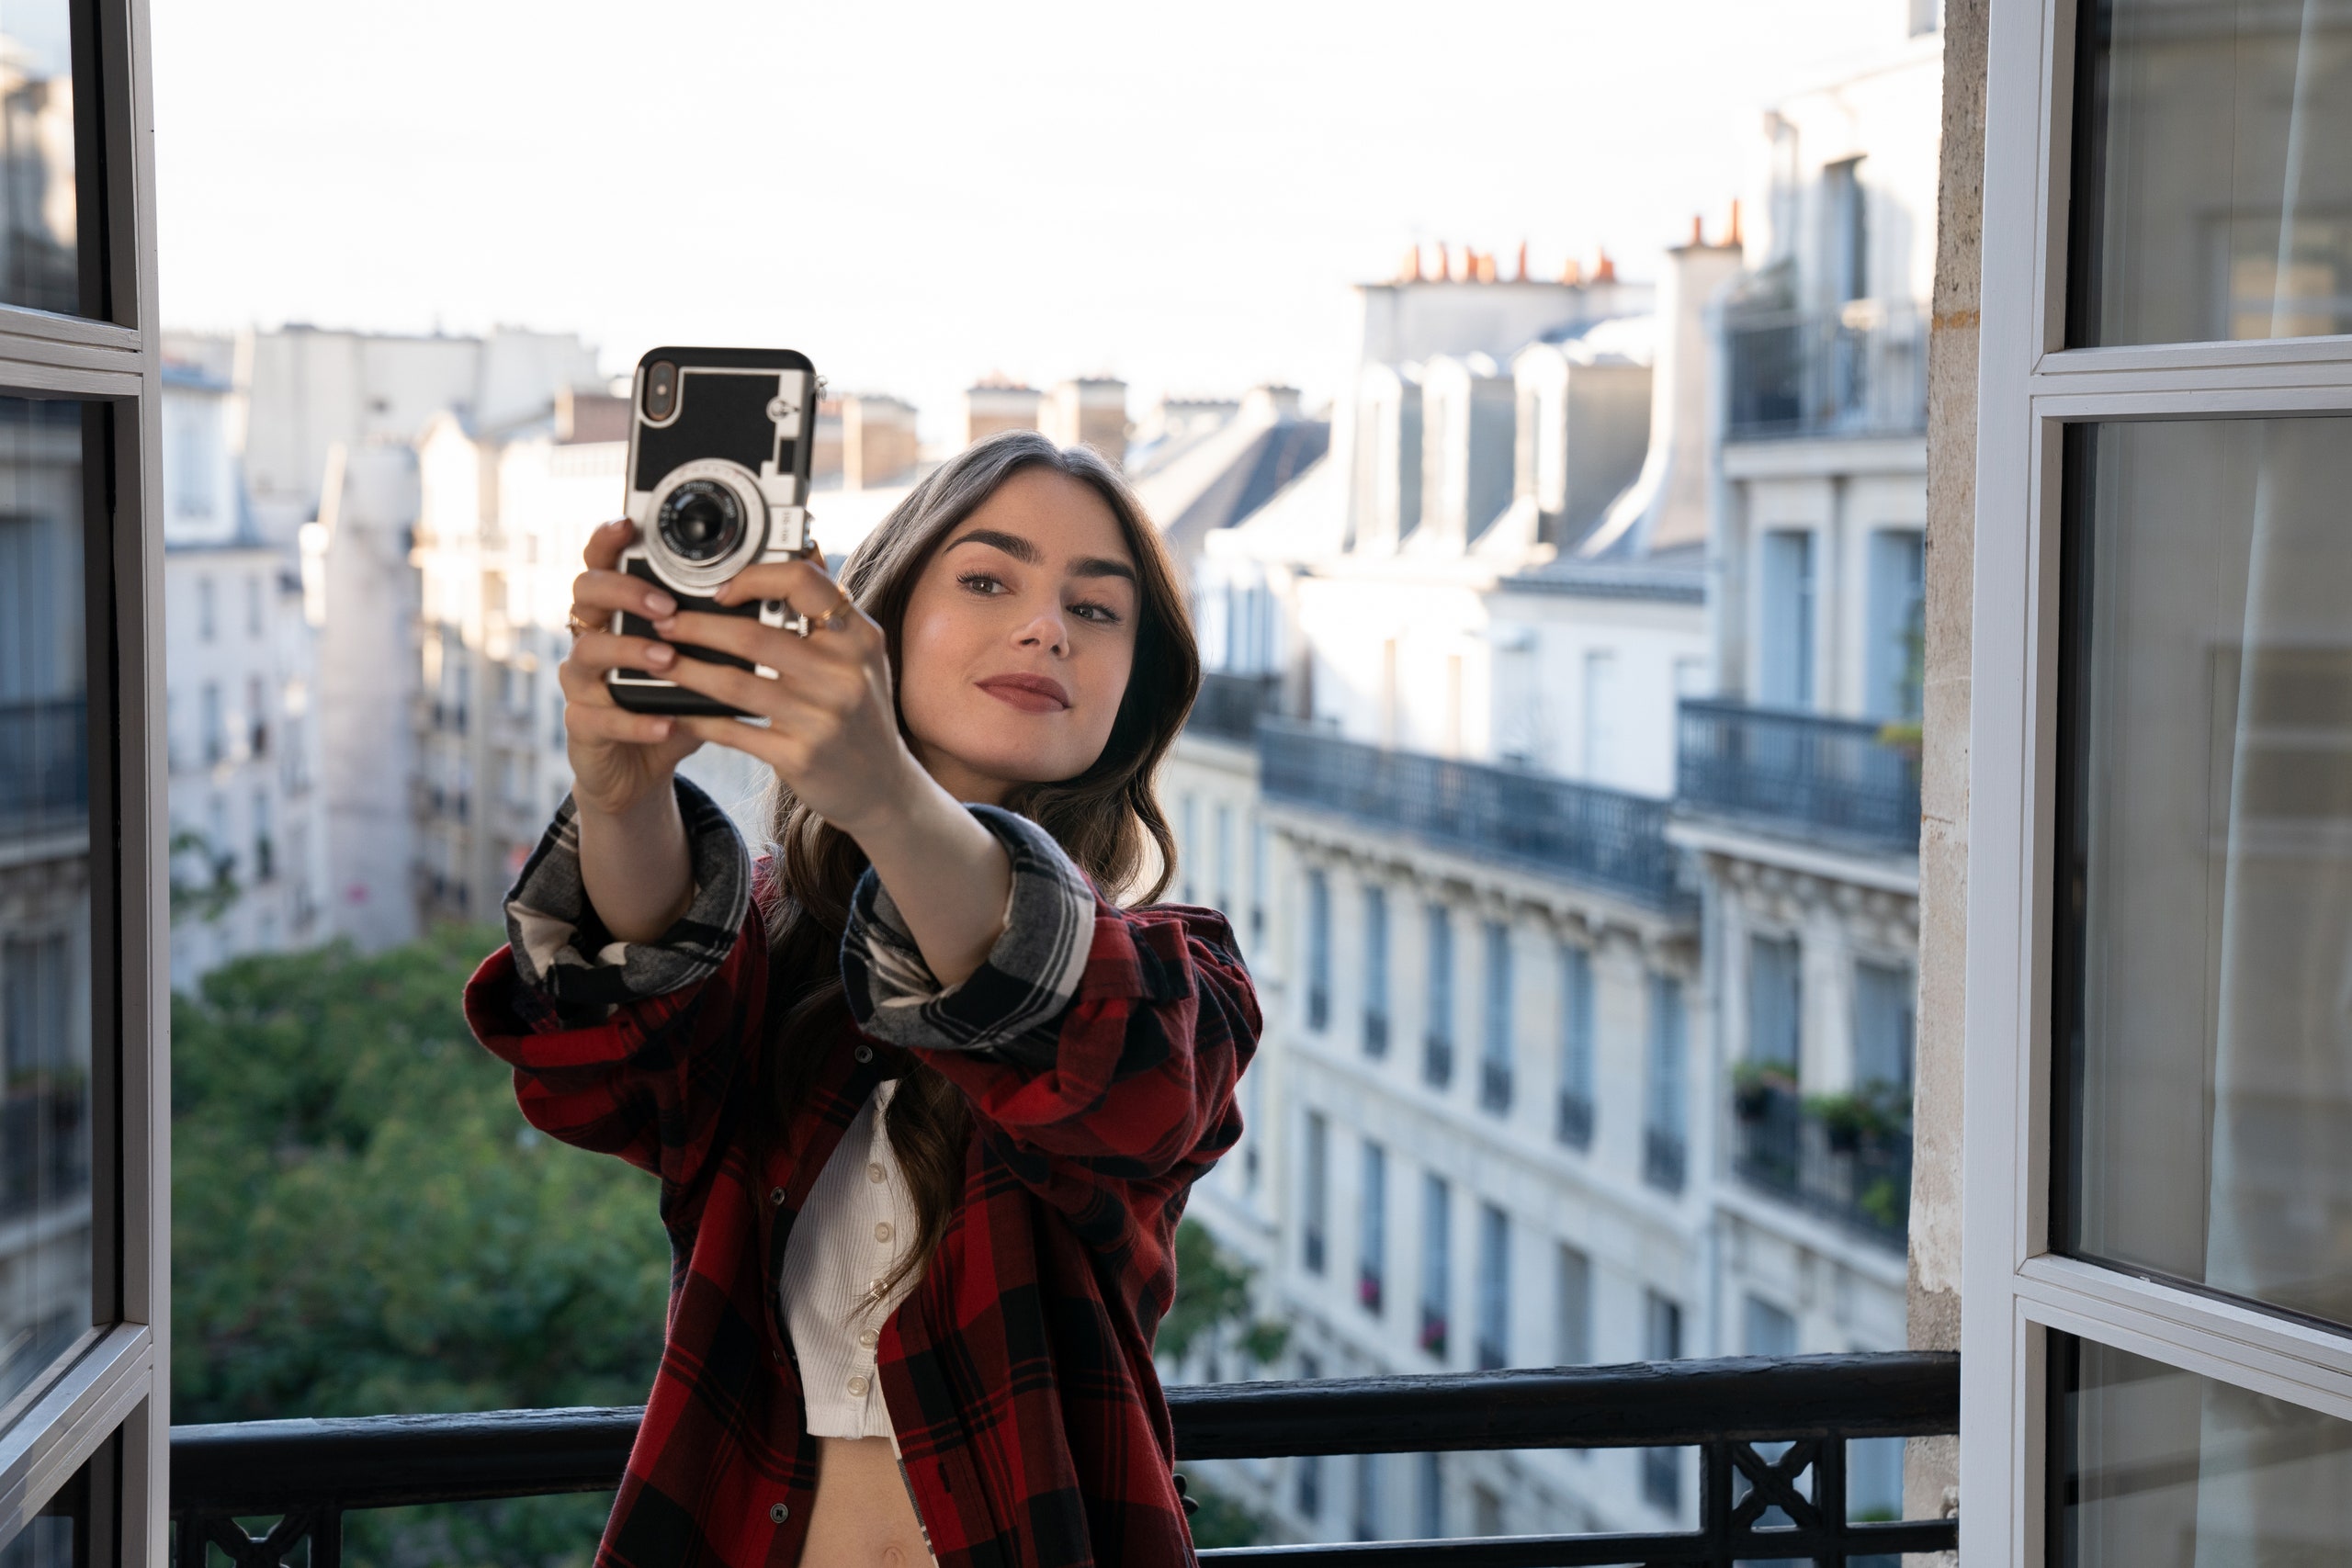 Lily Collins From Emily In Paris 2020 Wallpapers